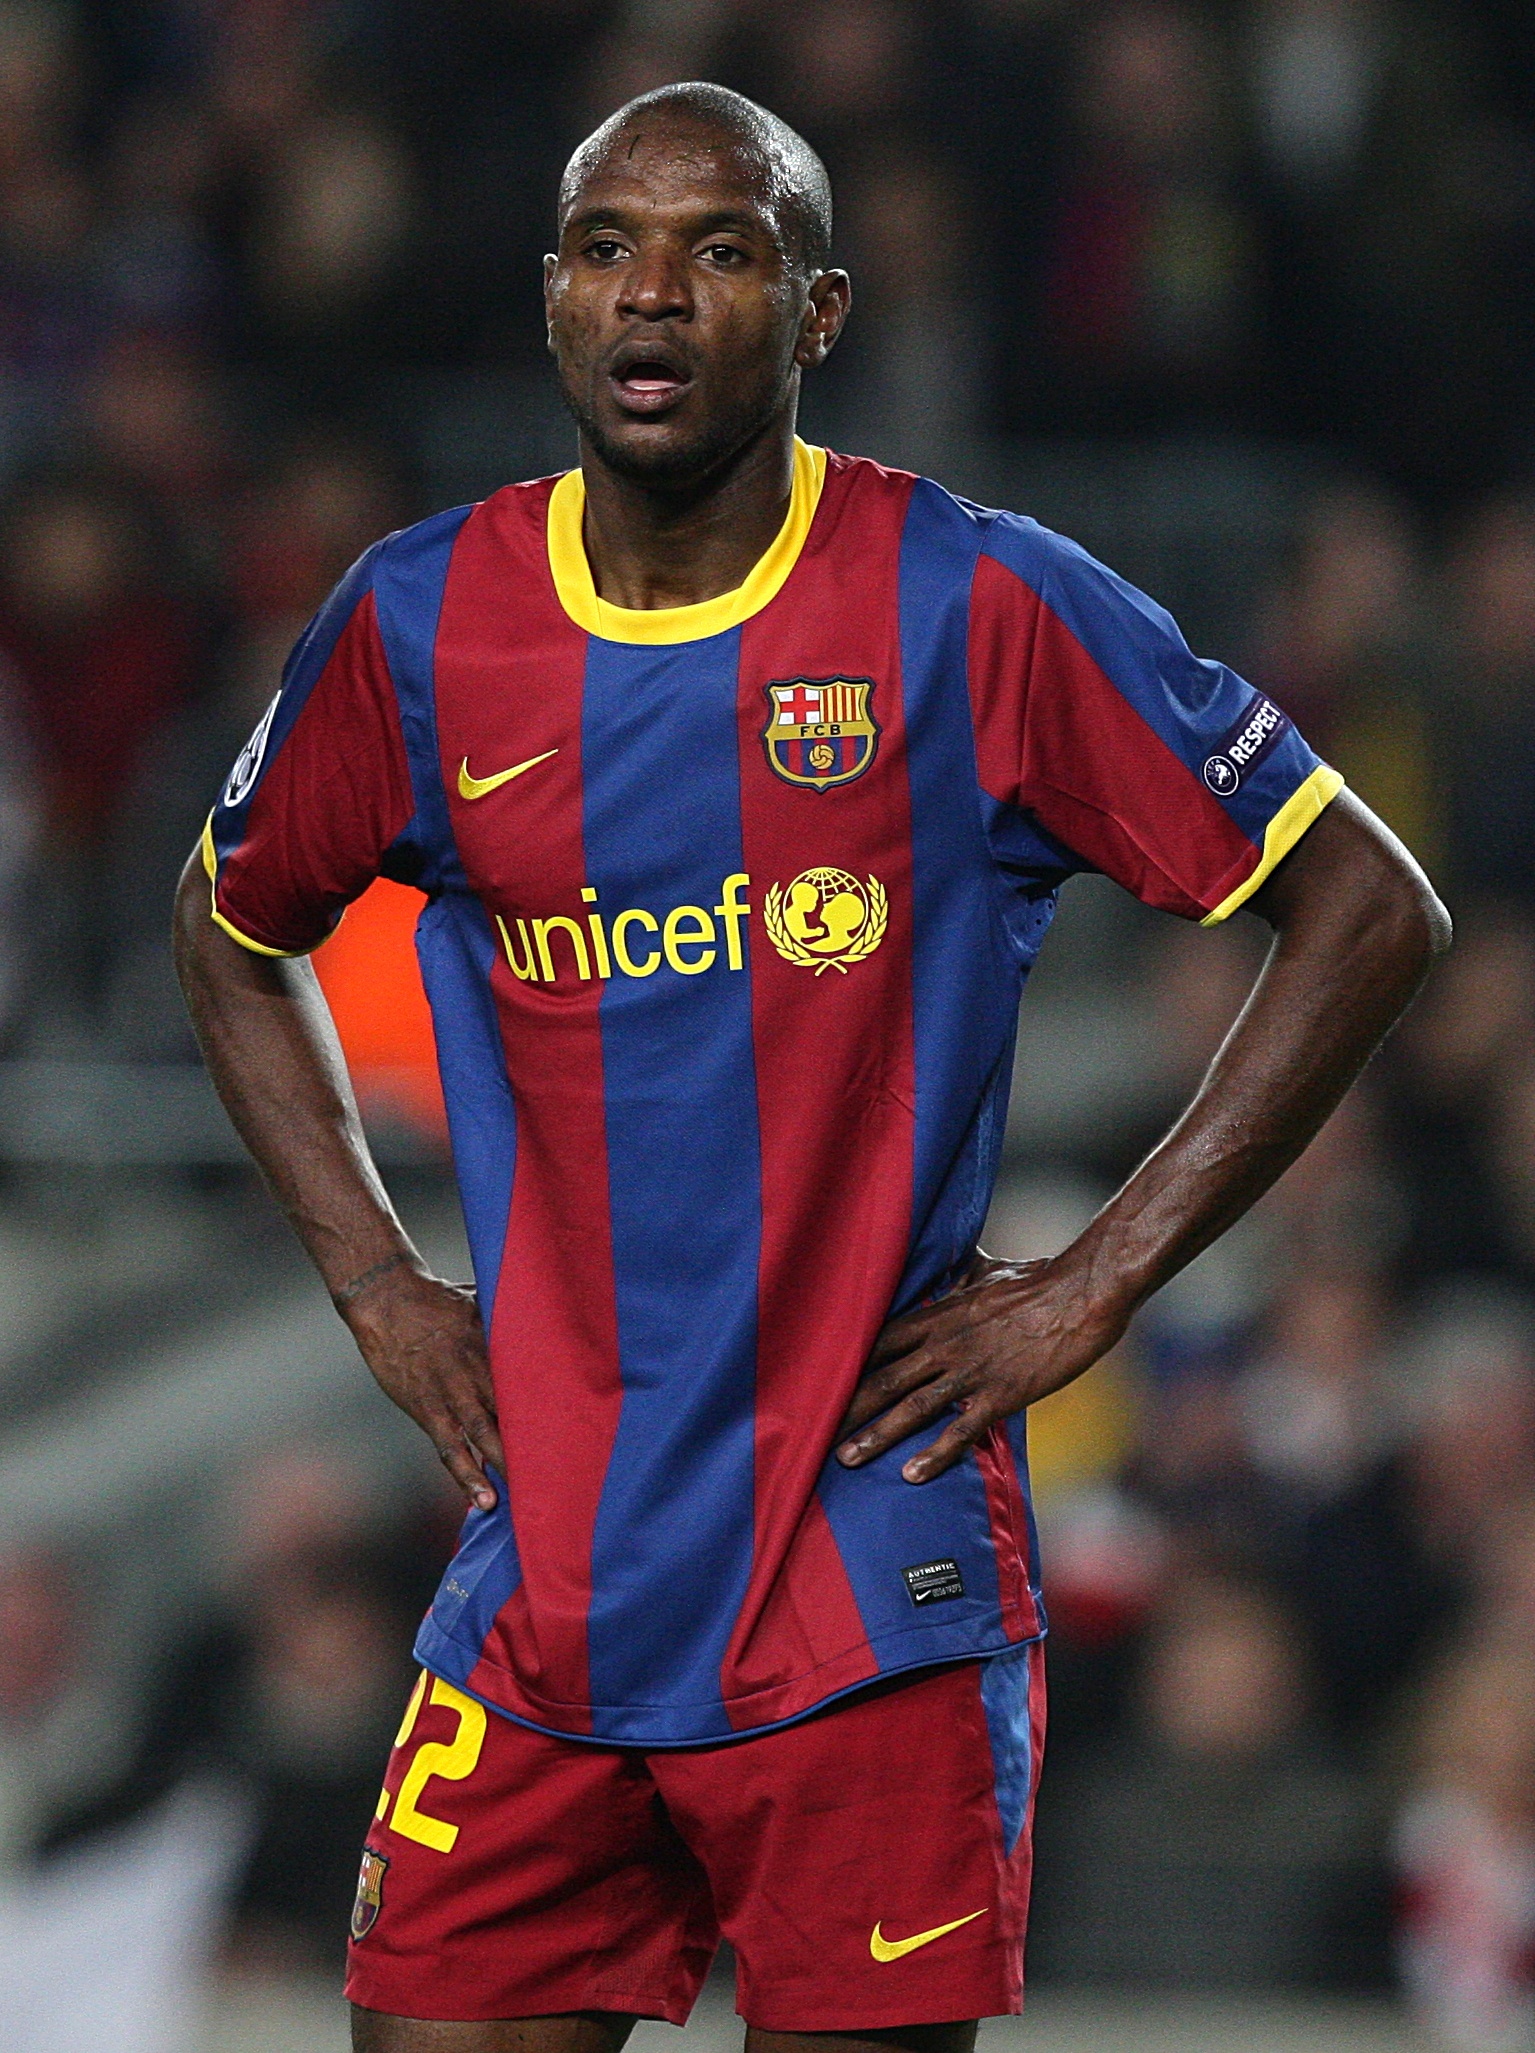 On This Day in 2012: Support for Eric Abidal after liver transplant ...